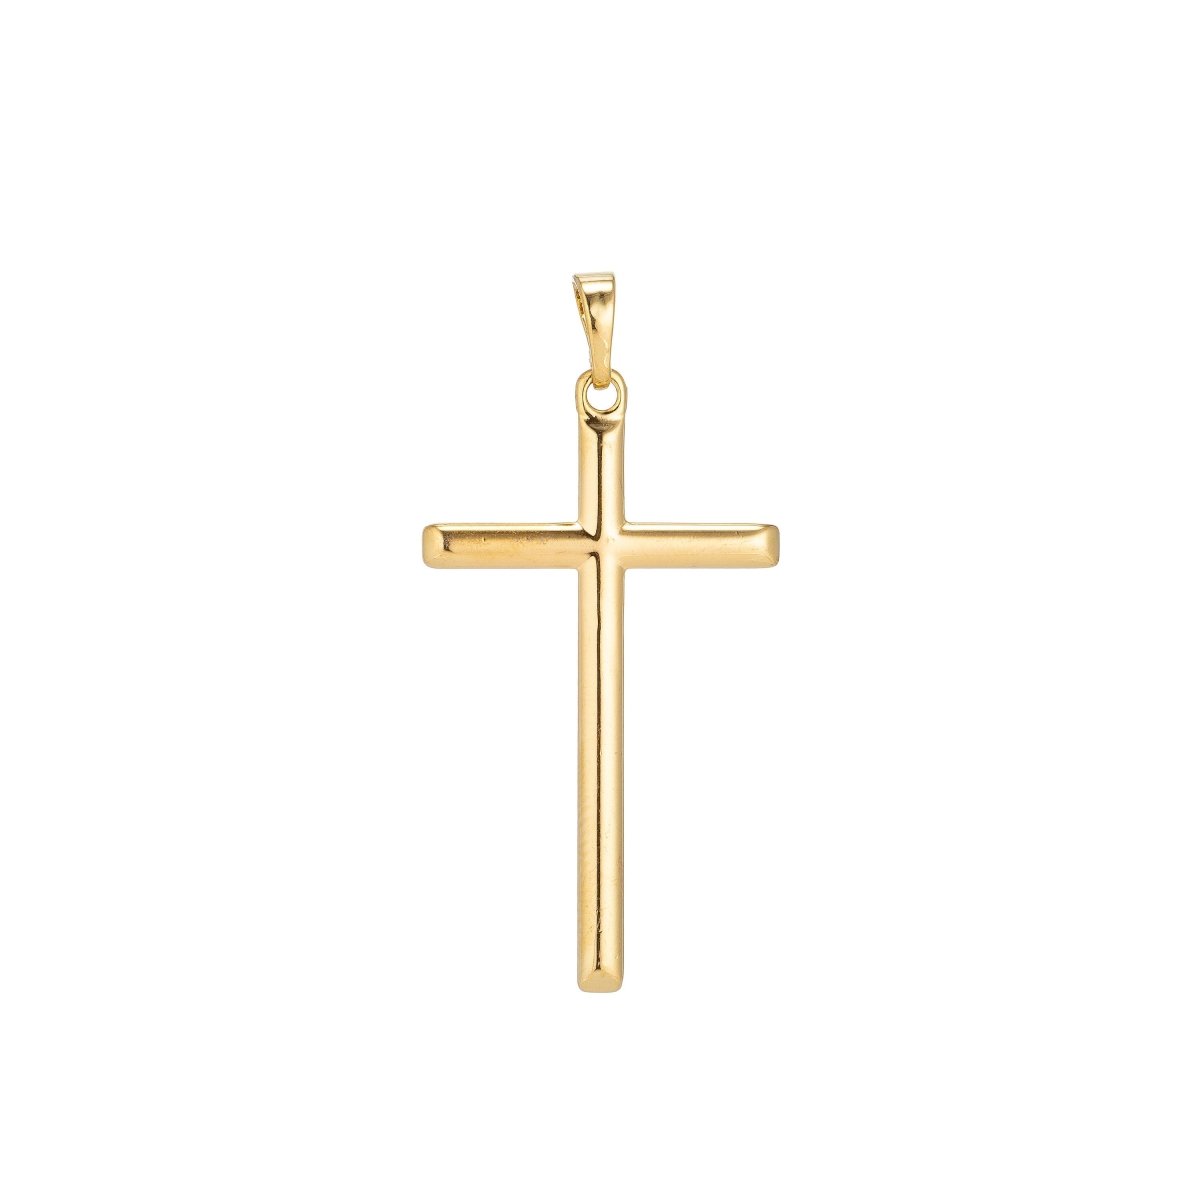 Simple Classic 24K Gold Filled Cross Charm Plain Faith Cross Pendant Religious Jewelry for Necklace Making supplies H-058 - DLUXCA